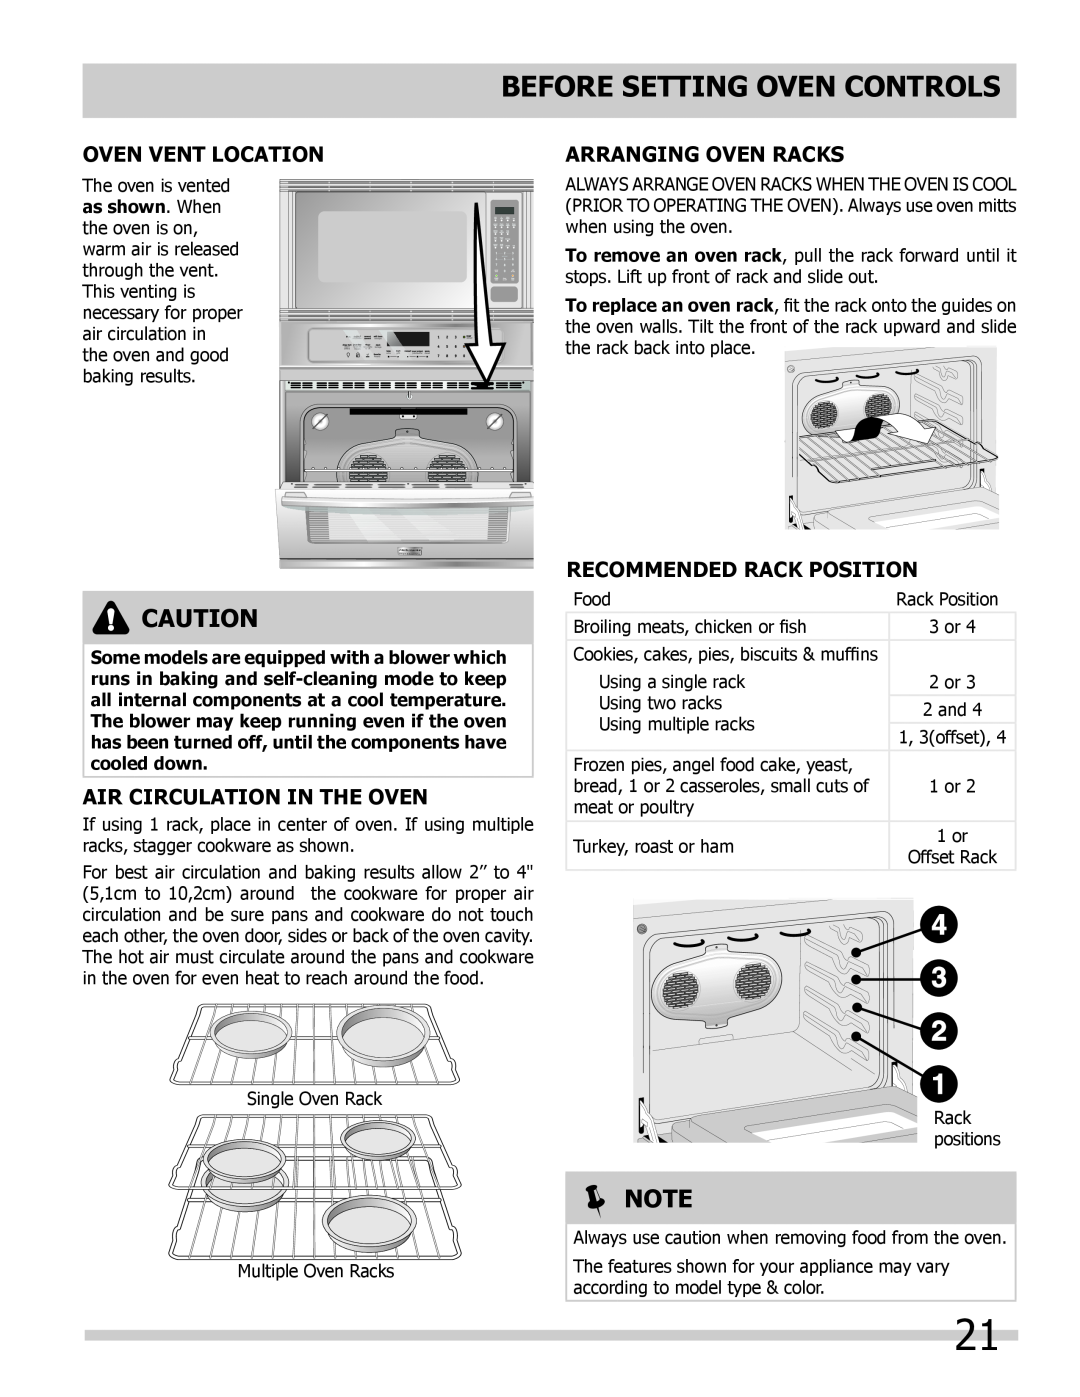 Frigidaire 318205300 Before Setting Oven Controls, Oven Vent Location, Air Circulation in the Oven, Arranging Oven Racks 